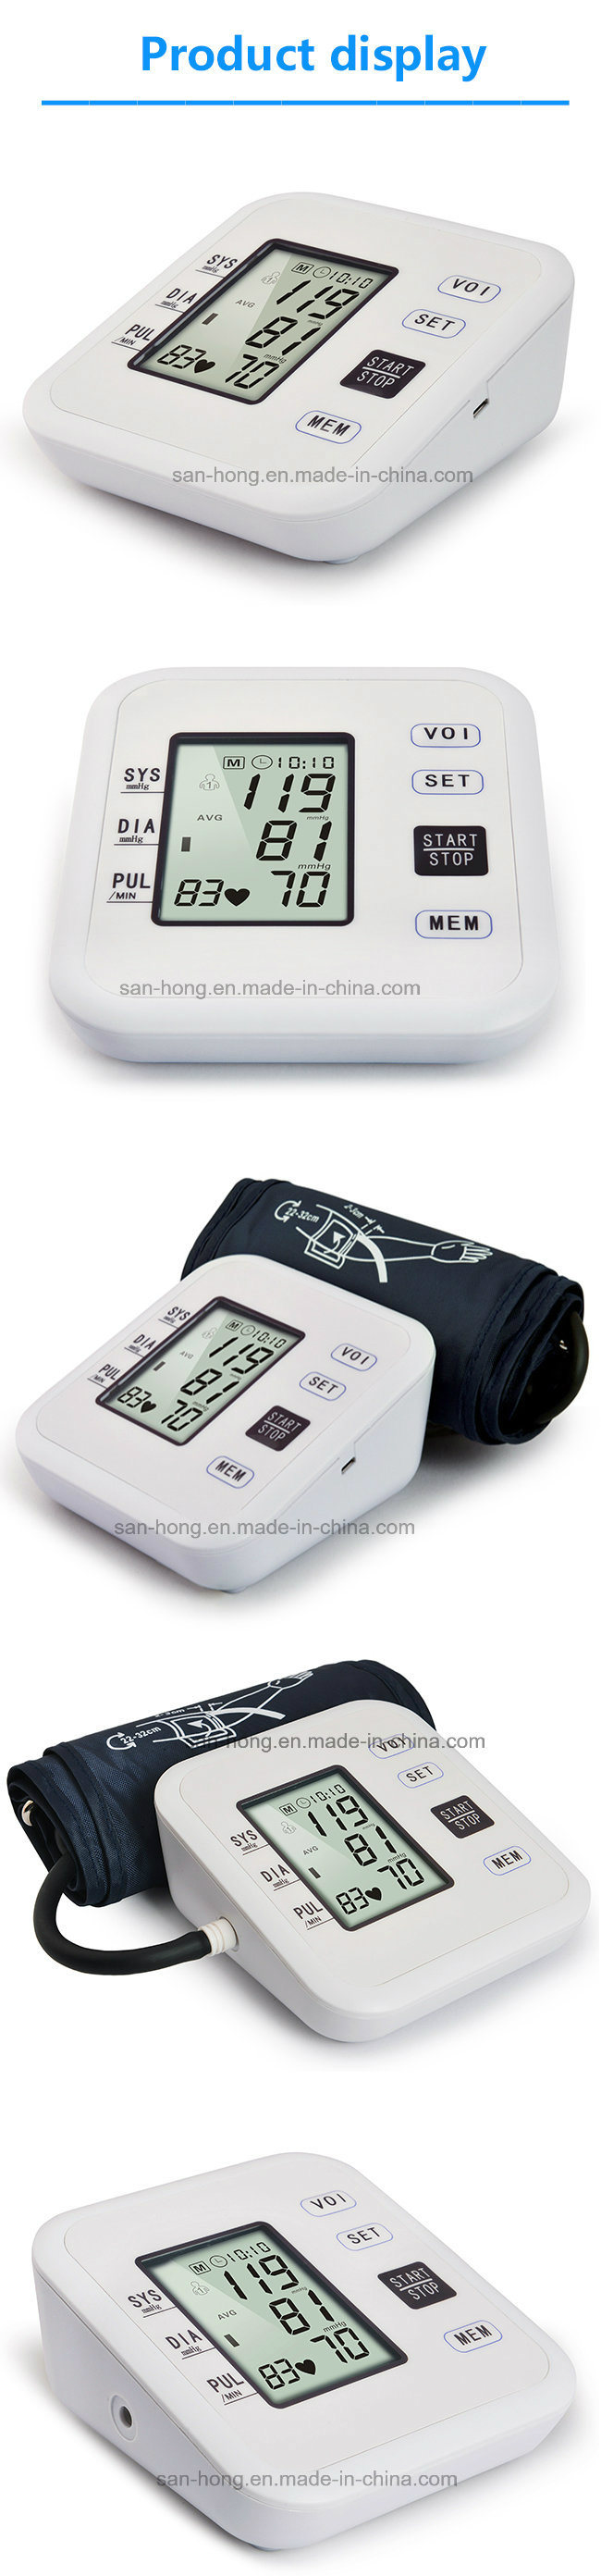 Blood Pressure Monitor with Digital LCD Display (1681A)